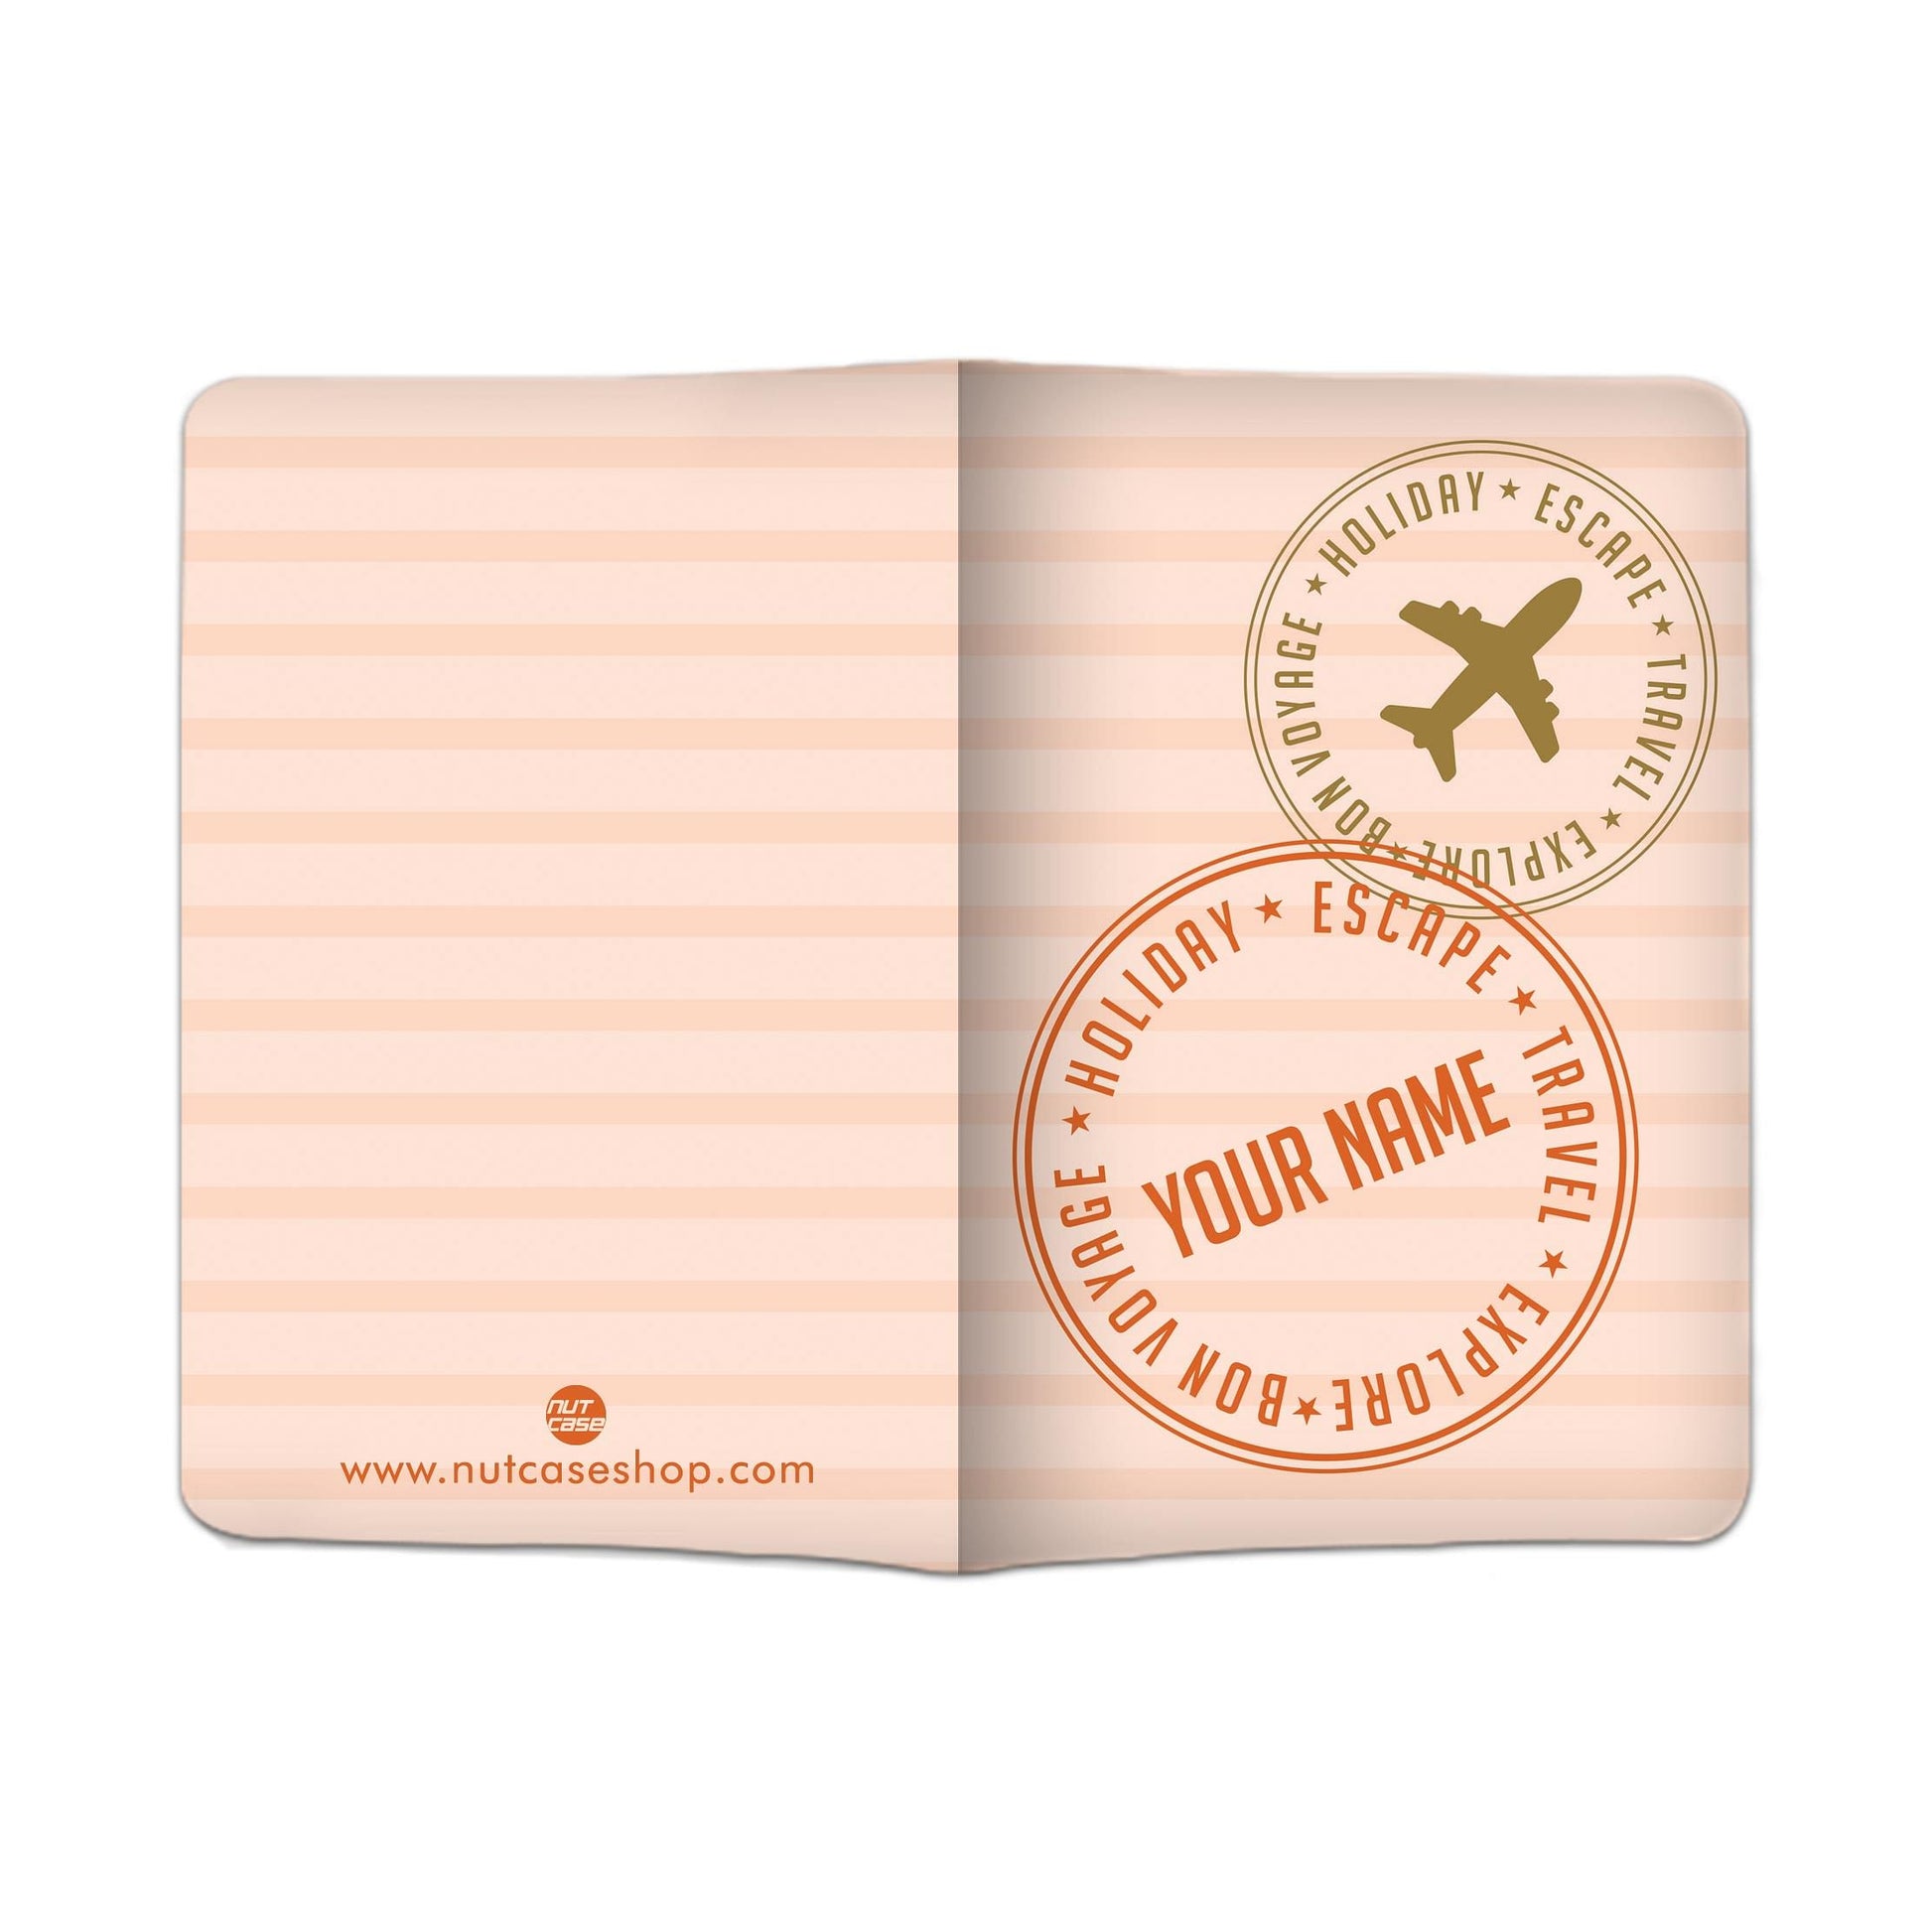 Classy Passport Cover for Him -  Holiday Escape Pink Nutcase